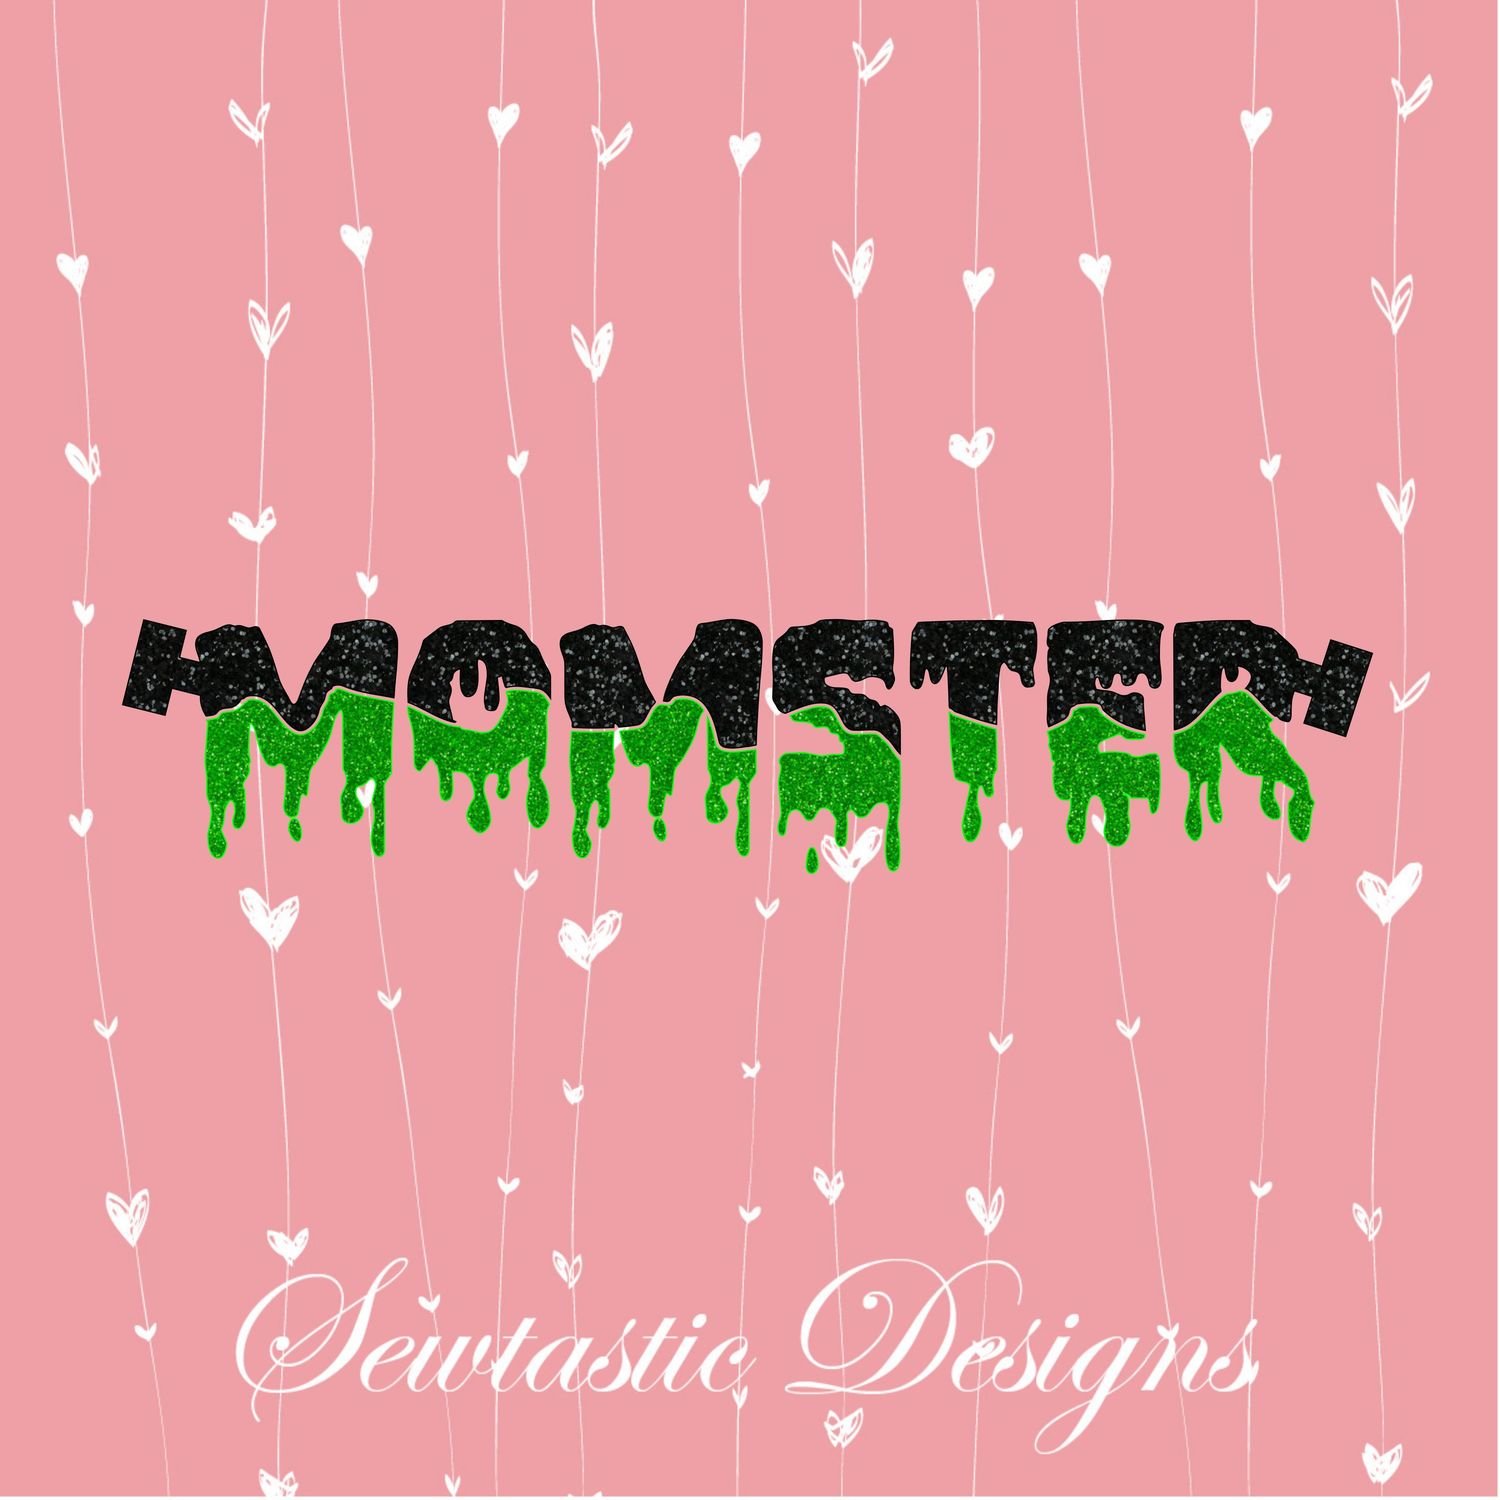 Download Momster Svg Mom Svg Halloween Svg Monster Svg Cut File Iron On Decal Cricut Silhouette Scanncut Many More